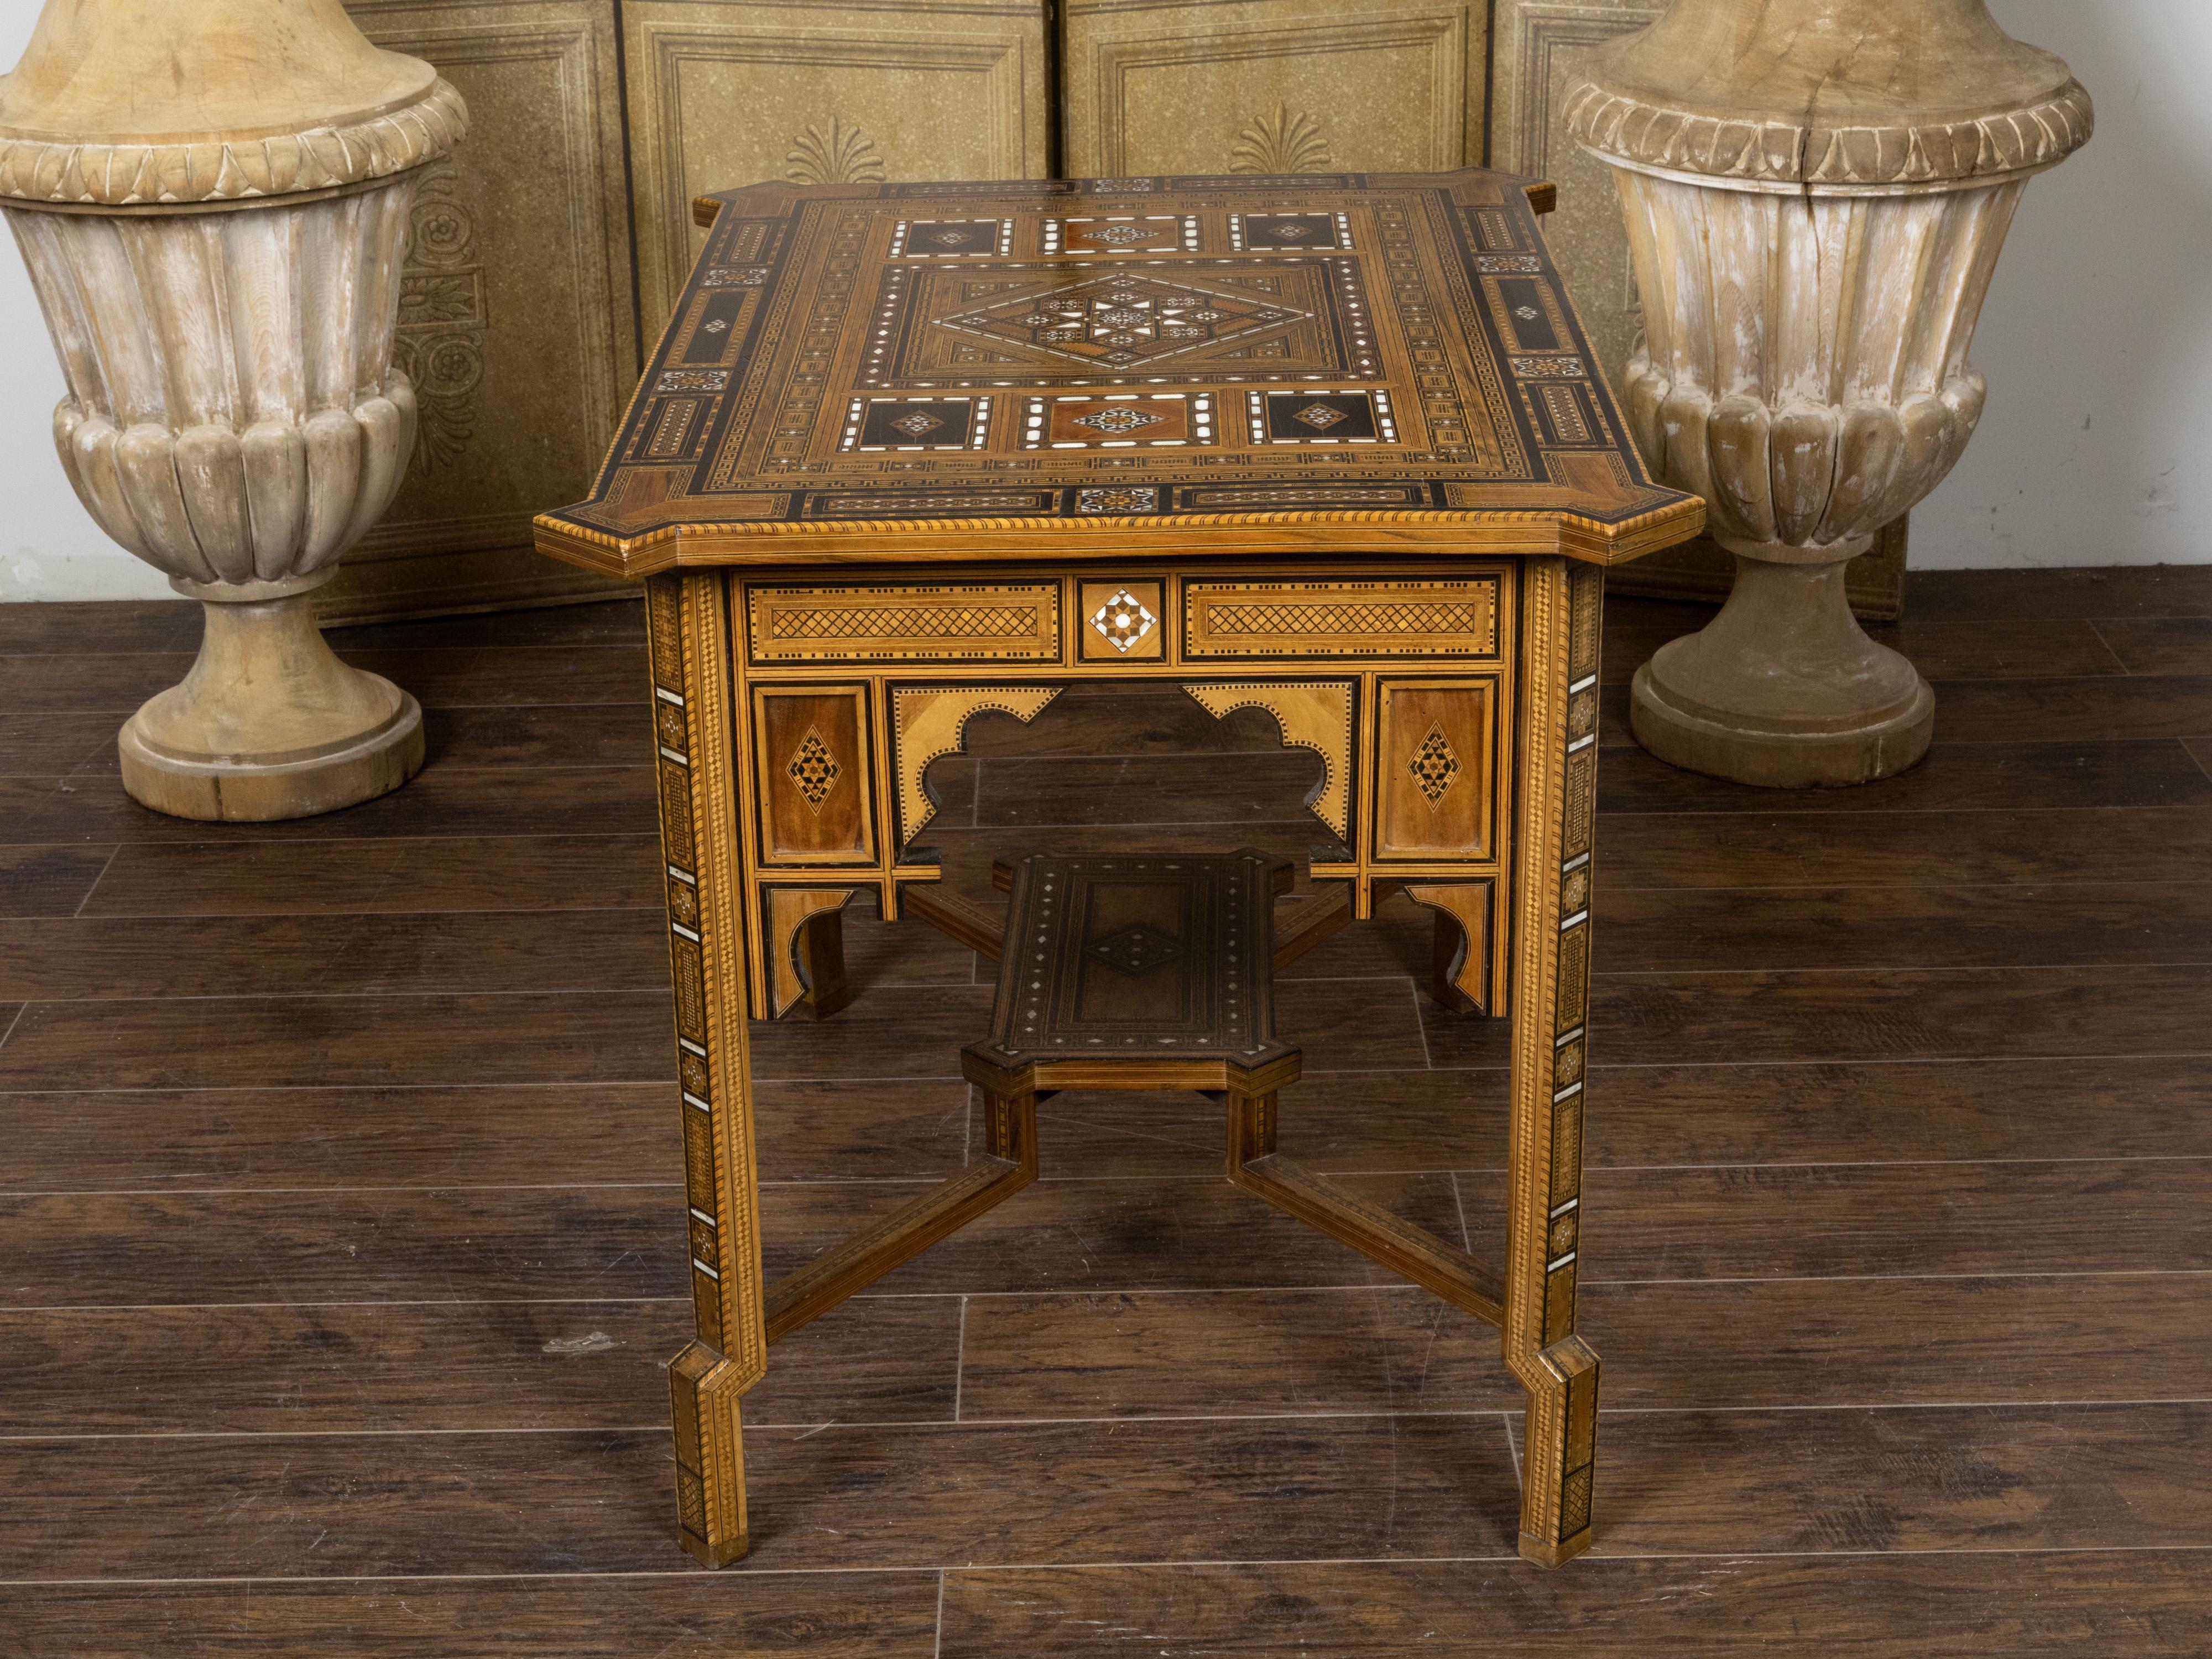 Mother-of-Pearl Moorish Style Moroccan Center Table with Inlaid Mother of Pearl Geometric Motifs For Sale